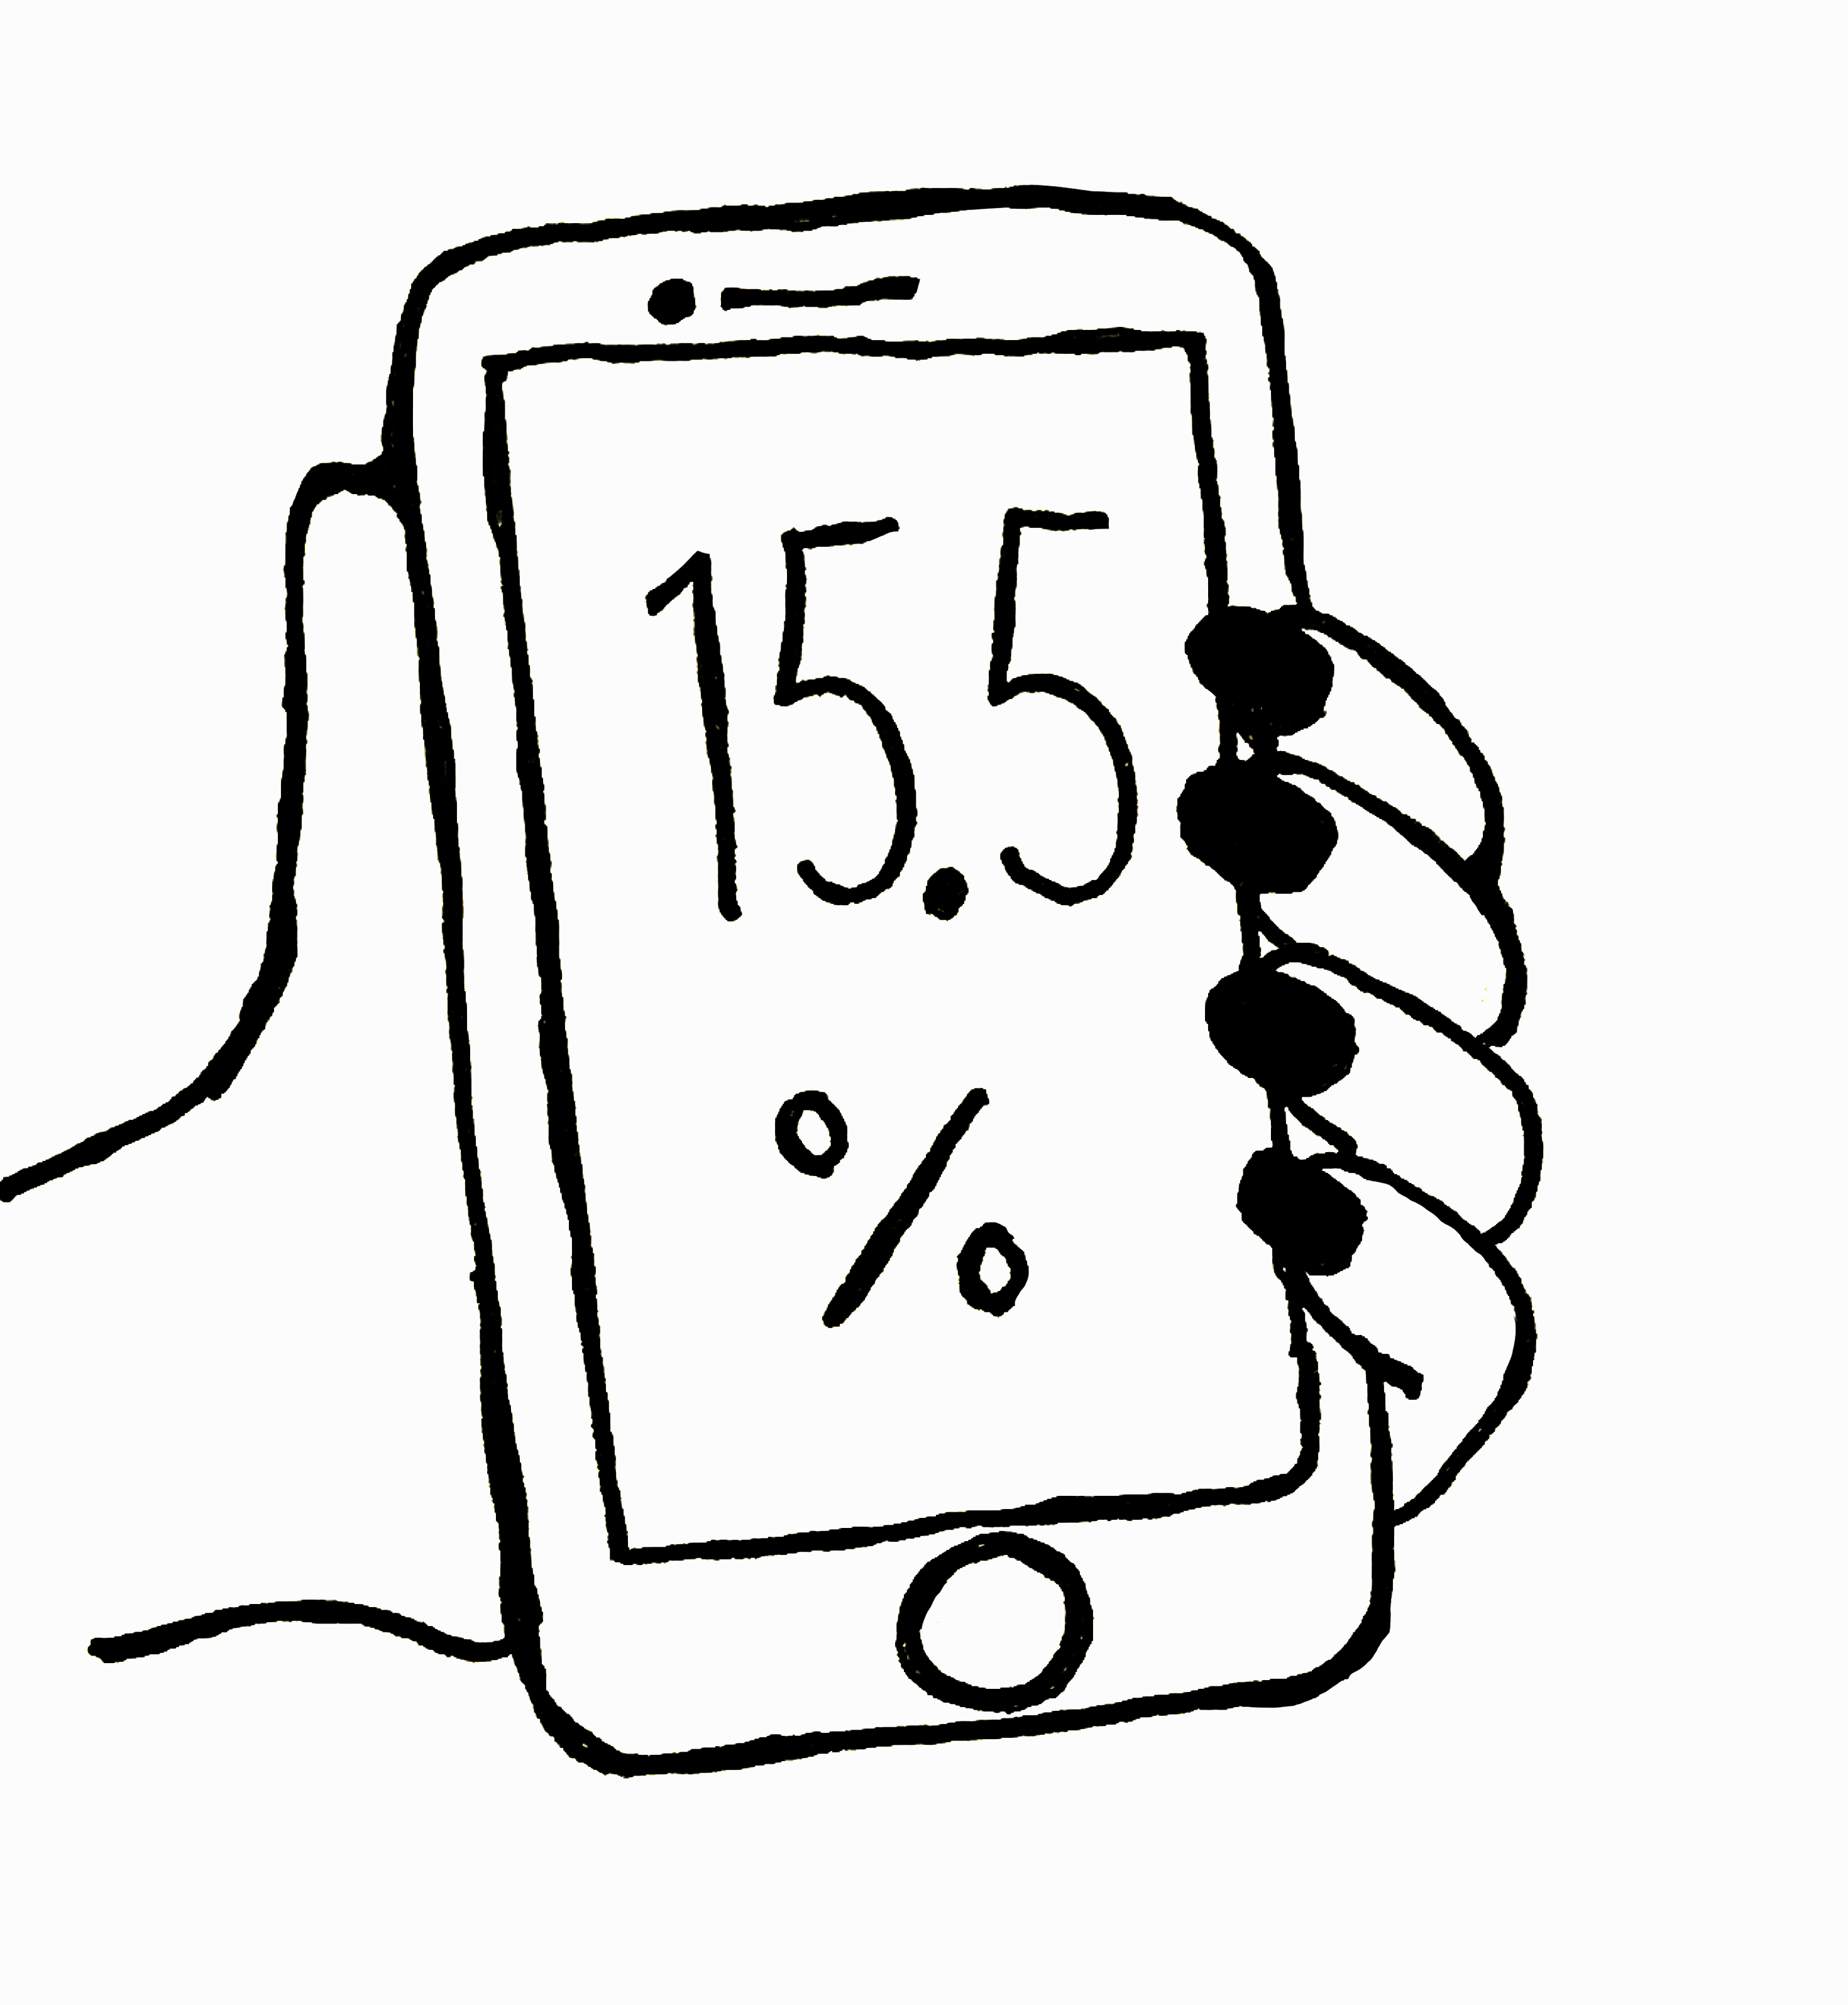 An illustration of a hand holding a smartphone with the text 15.5% on the screen.